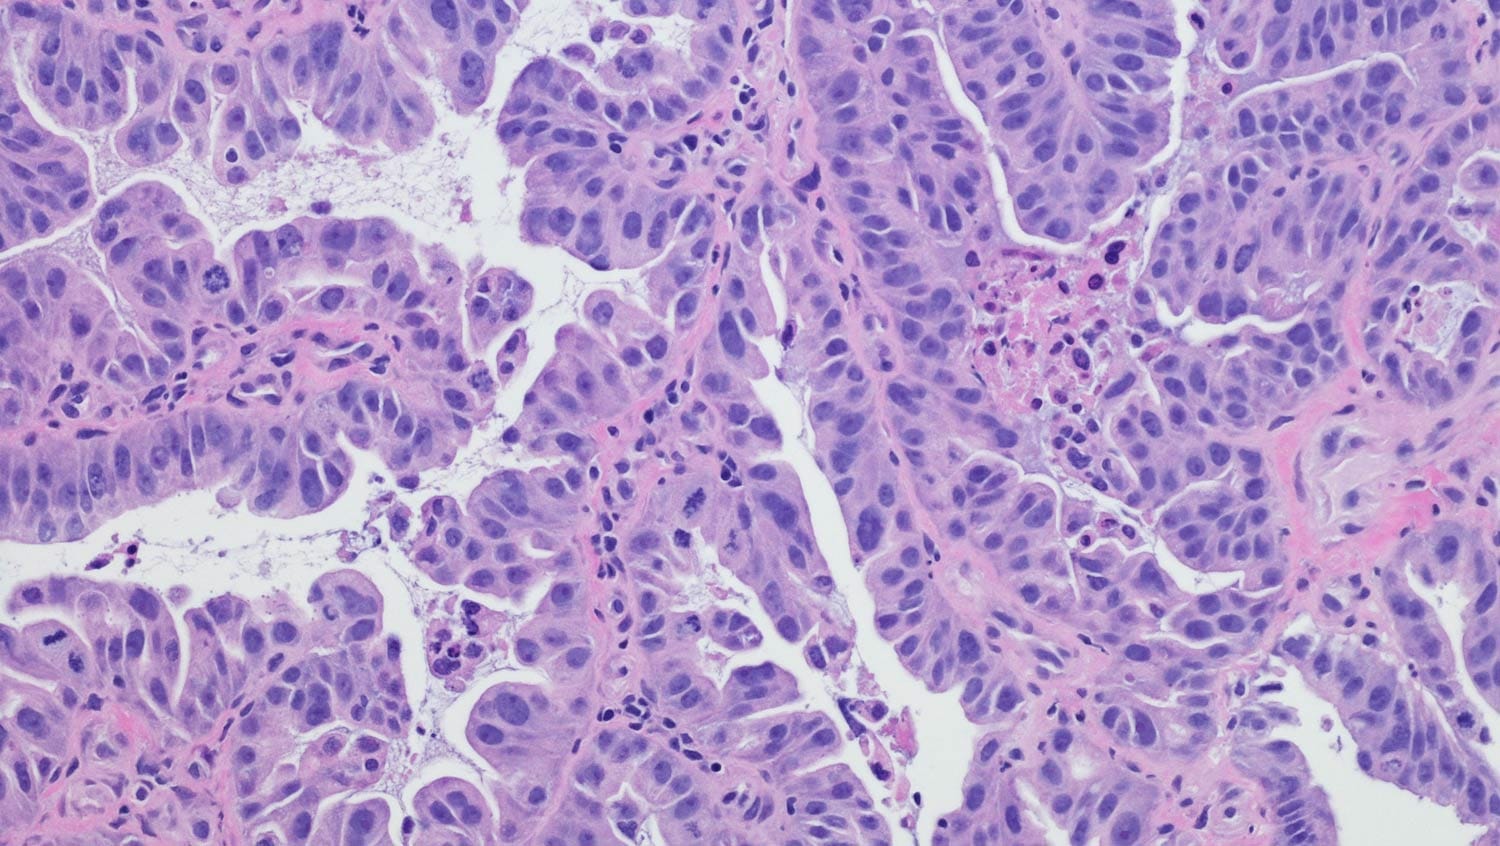 microscopic view of esophageal cancer